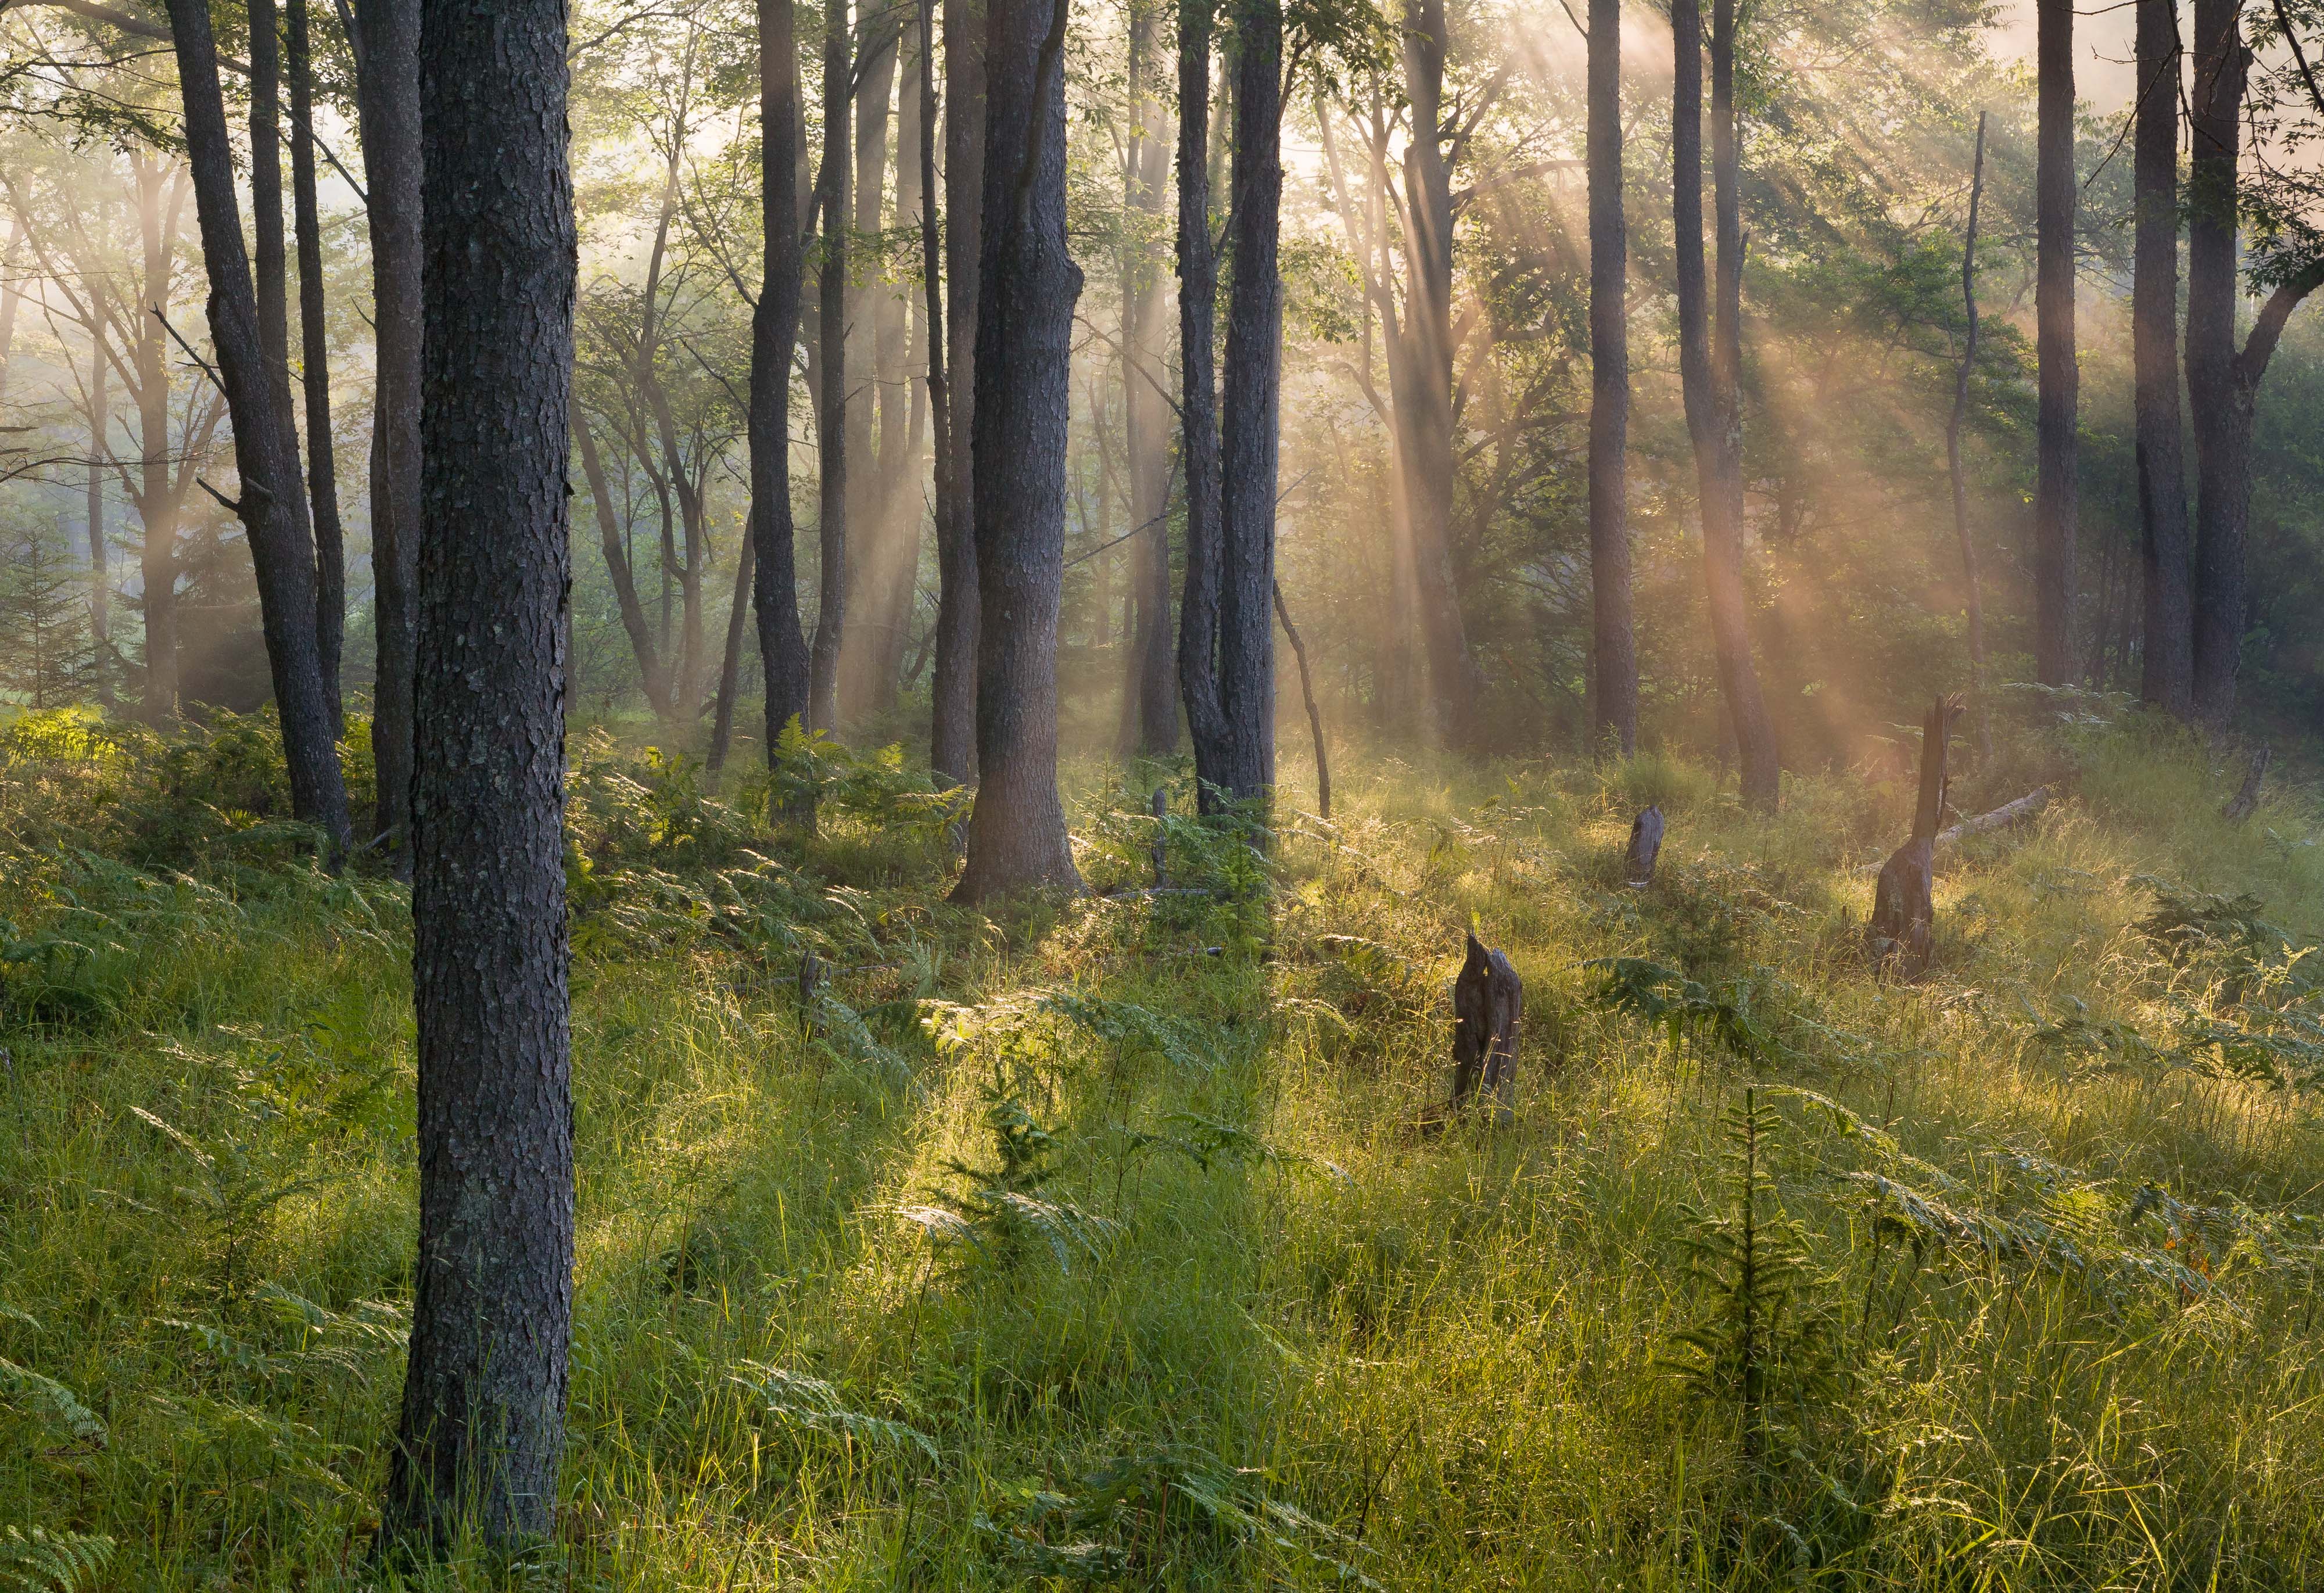 Sun beams shine through a misty forest with tall and thin trees.